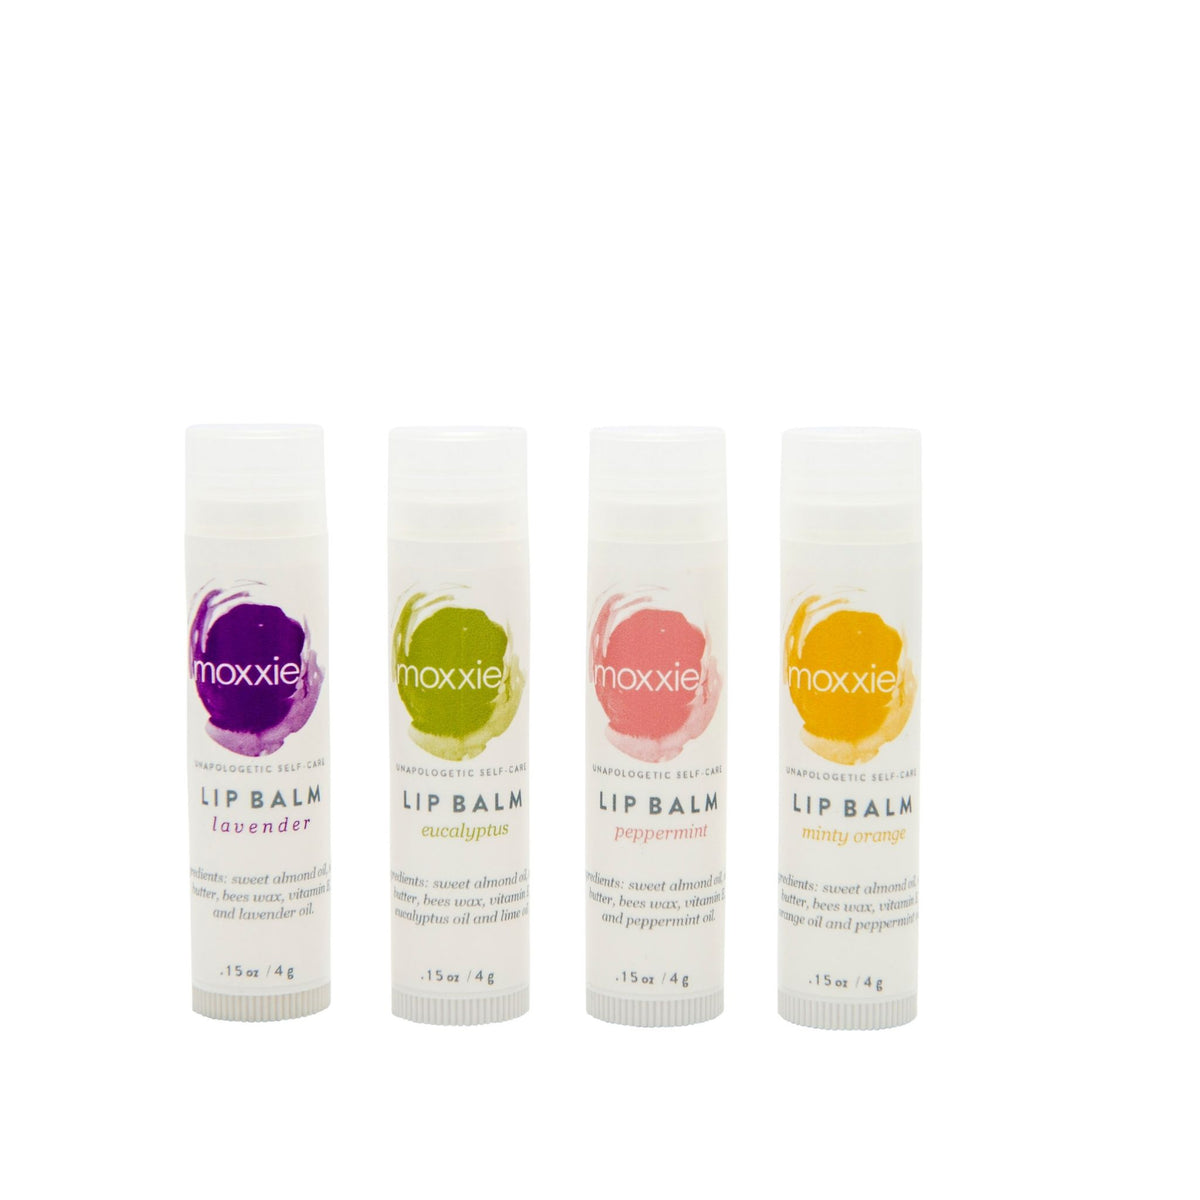 Lineup of Moxxie all natural lip balms in lavender, eucalyptus, peppermint, and minty orange